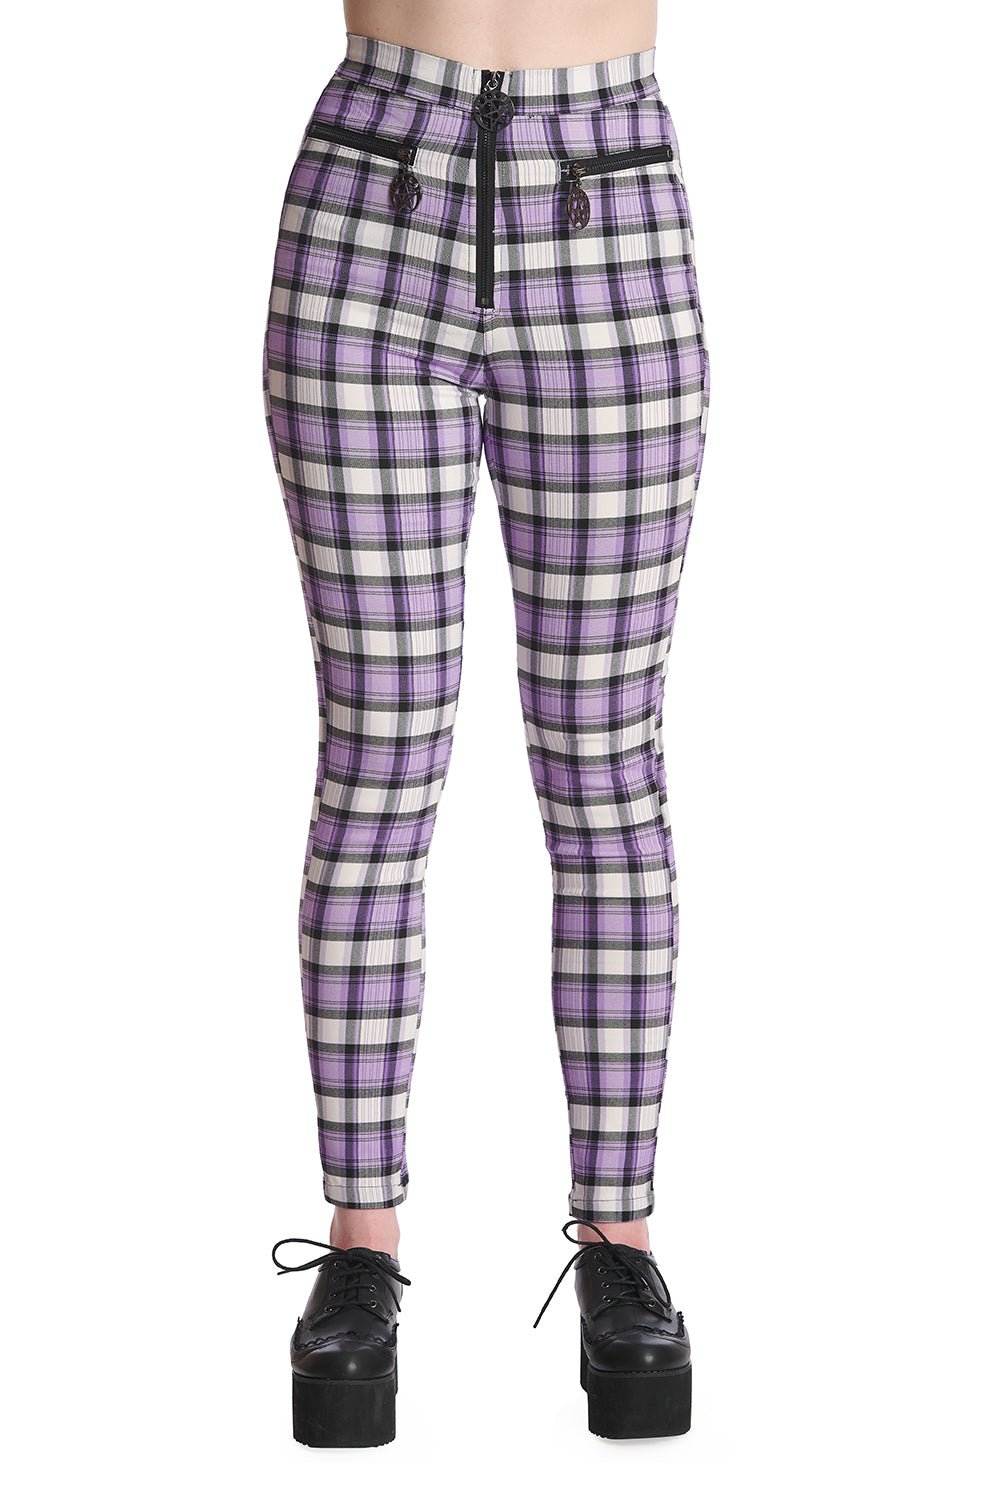 High waisted purple and white tartan trousers with front zip and pentagram pendants